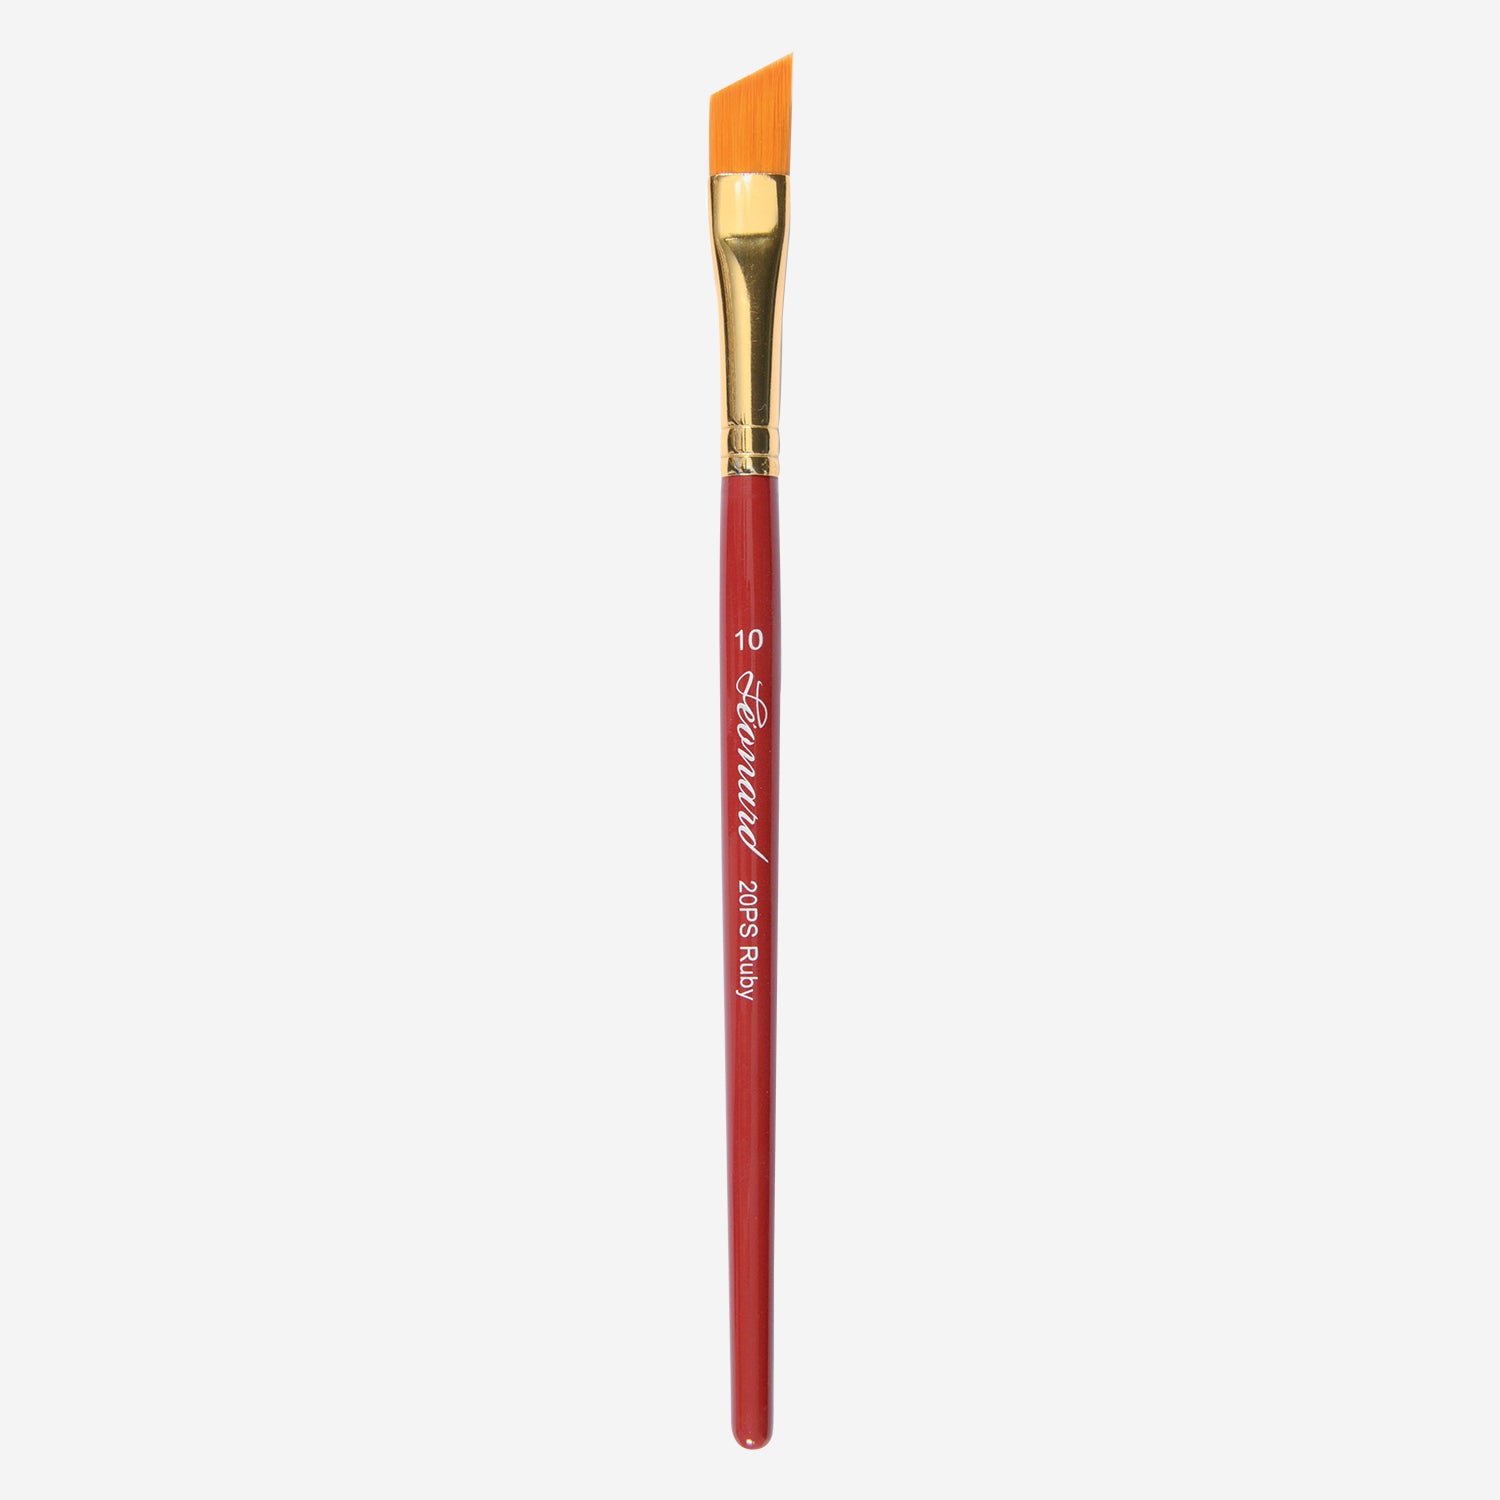 Leonard Synthetic Ruby Chisel - Melbourne Etching Supplies